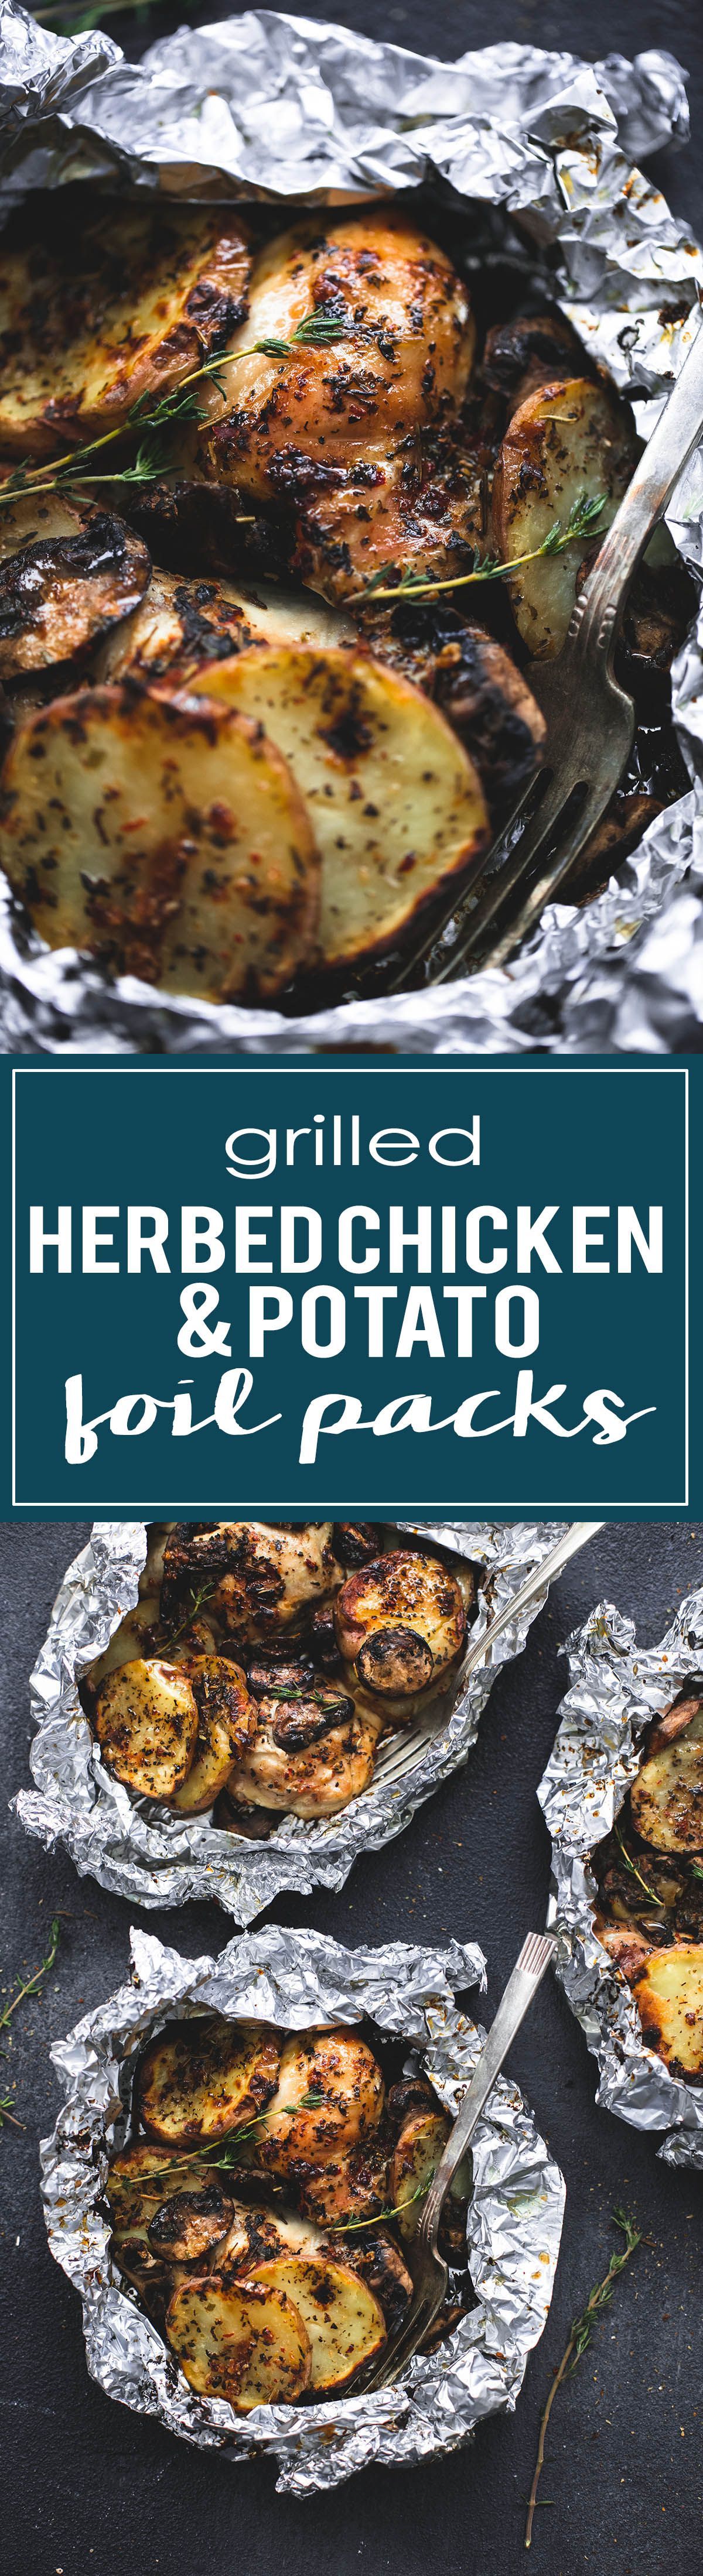 Grilled herbed chicken & potato foil packs are a fun and simple summer dinner that the whole family will love. They can even be